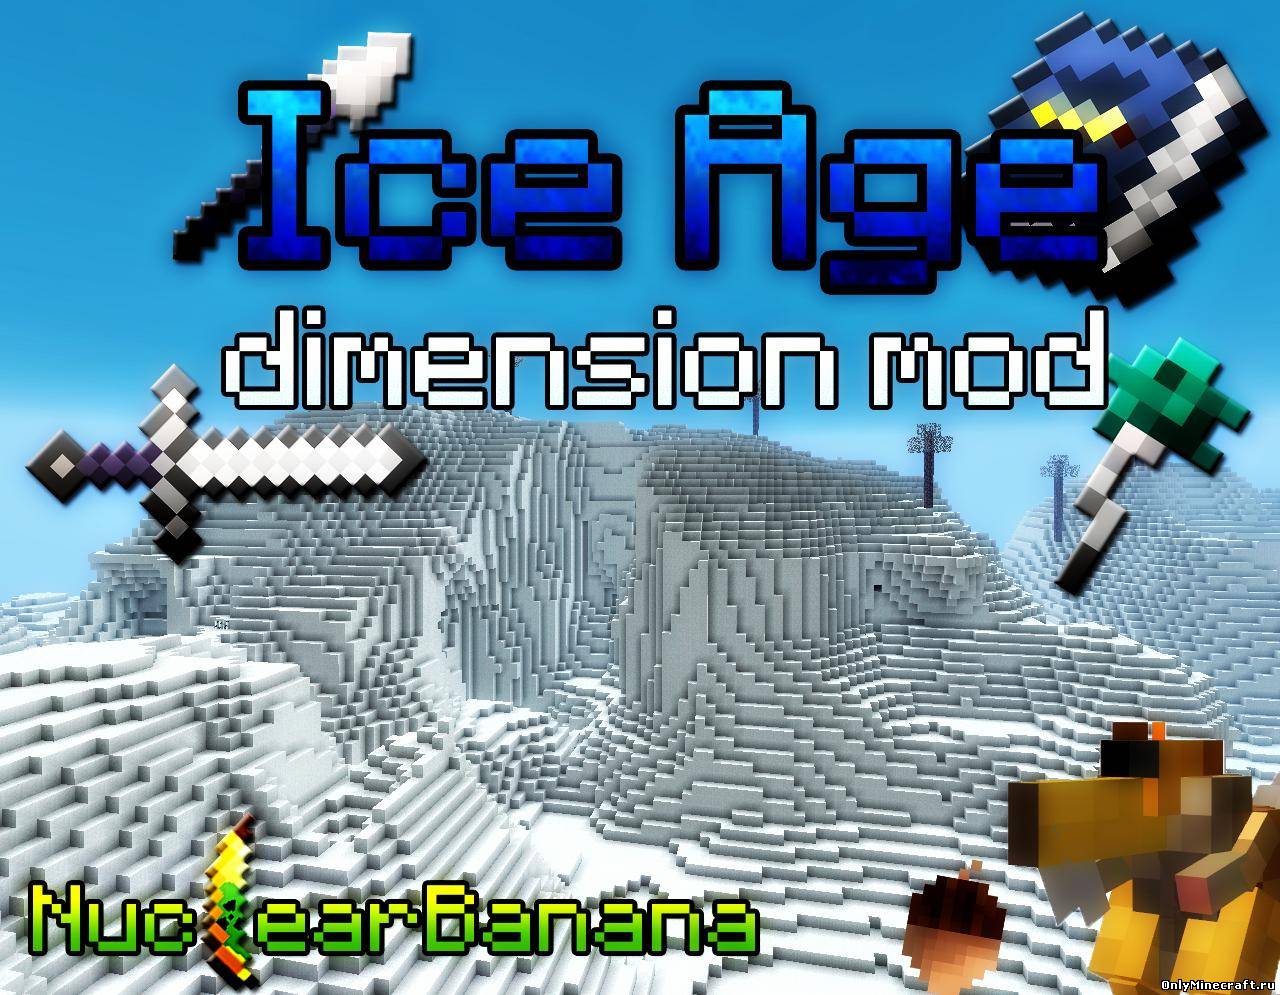 IceAge Dimension